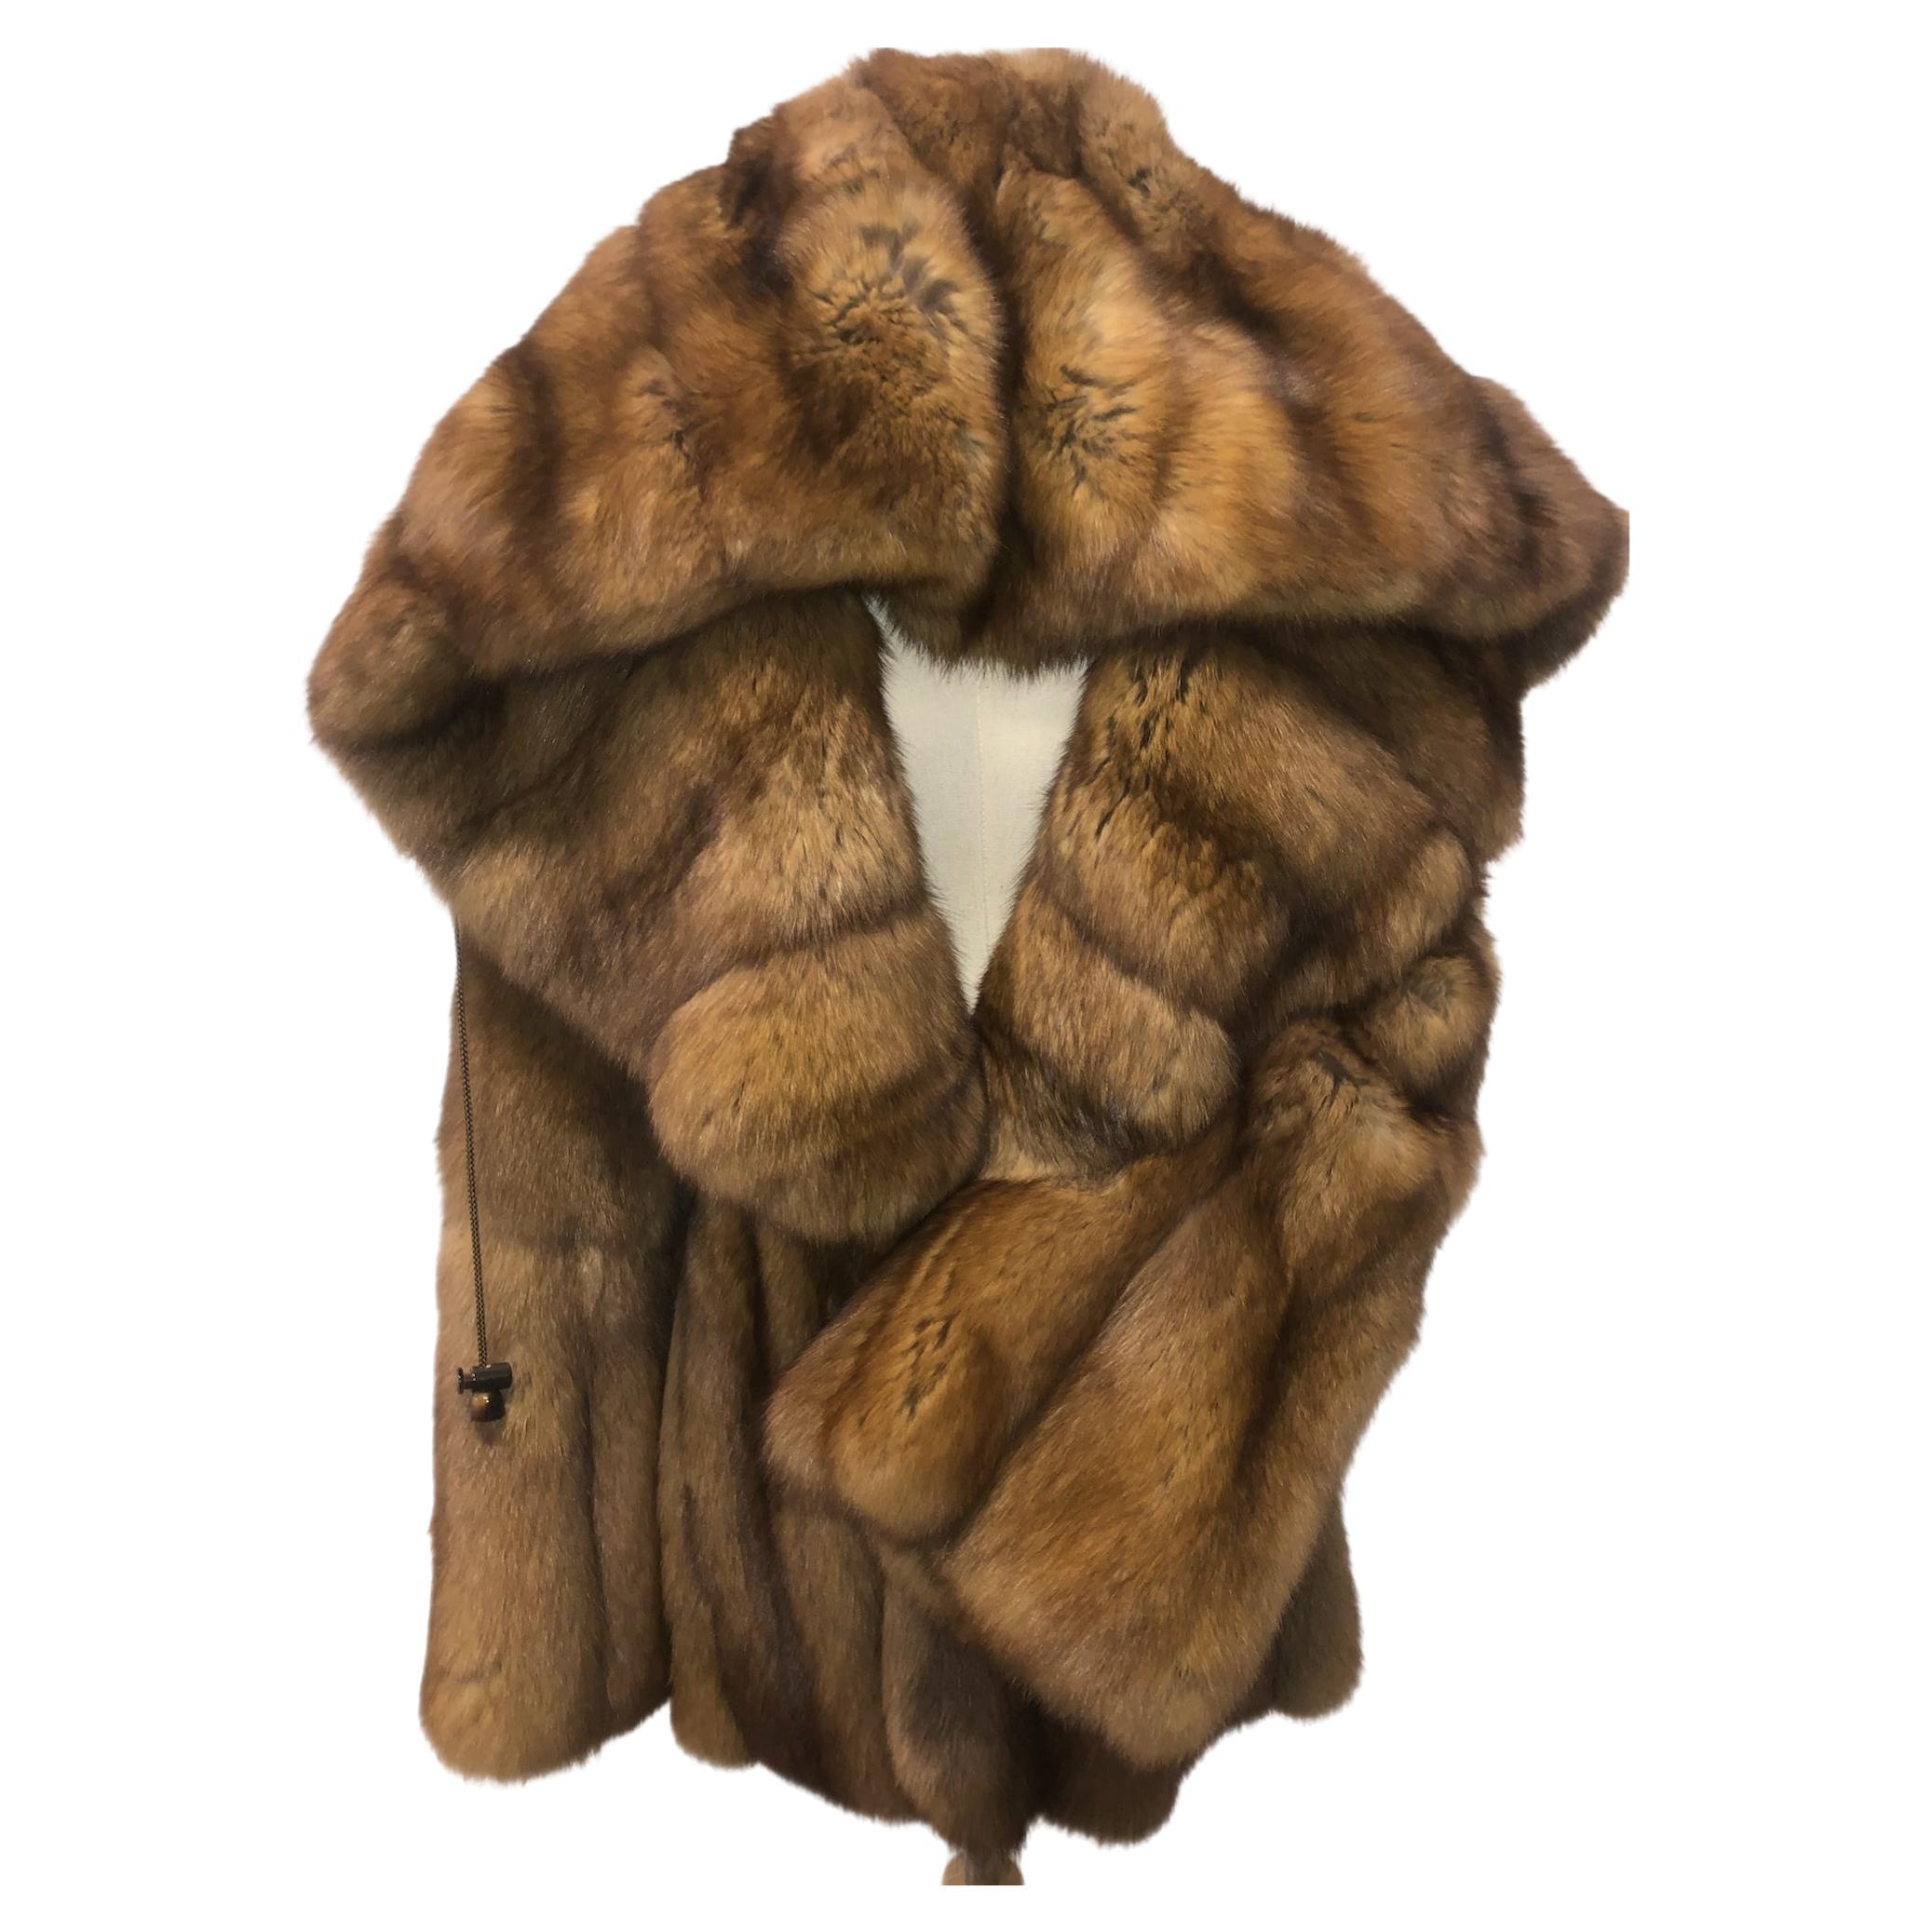 What is sable fur?